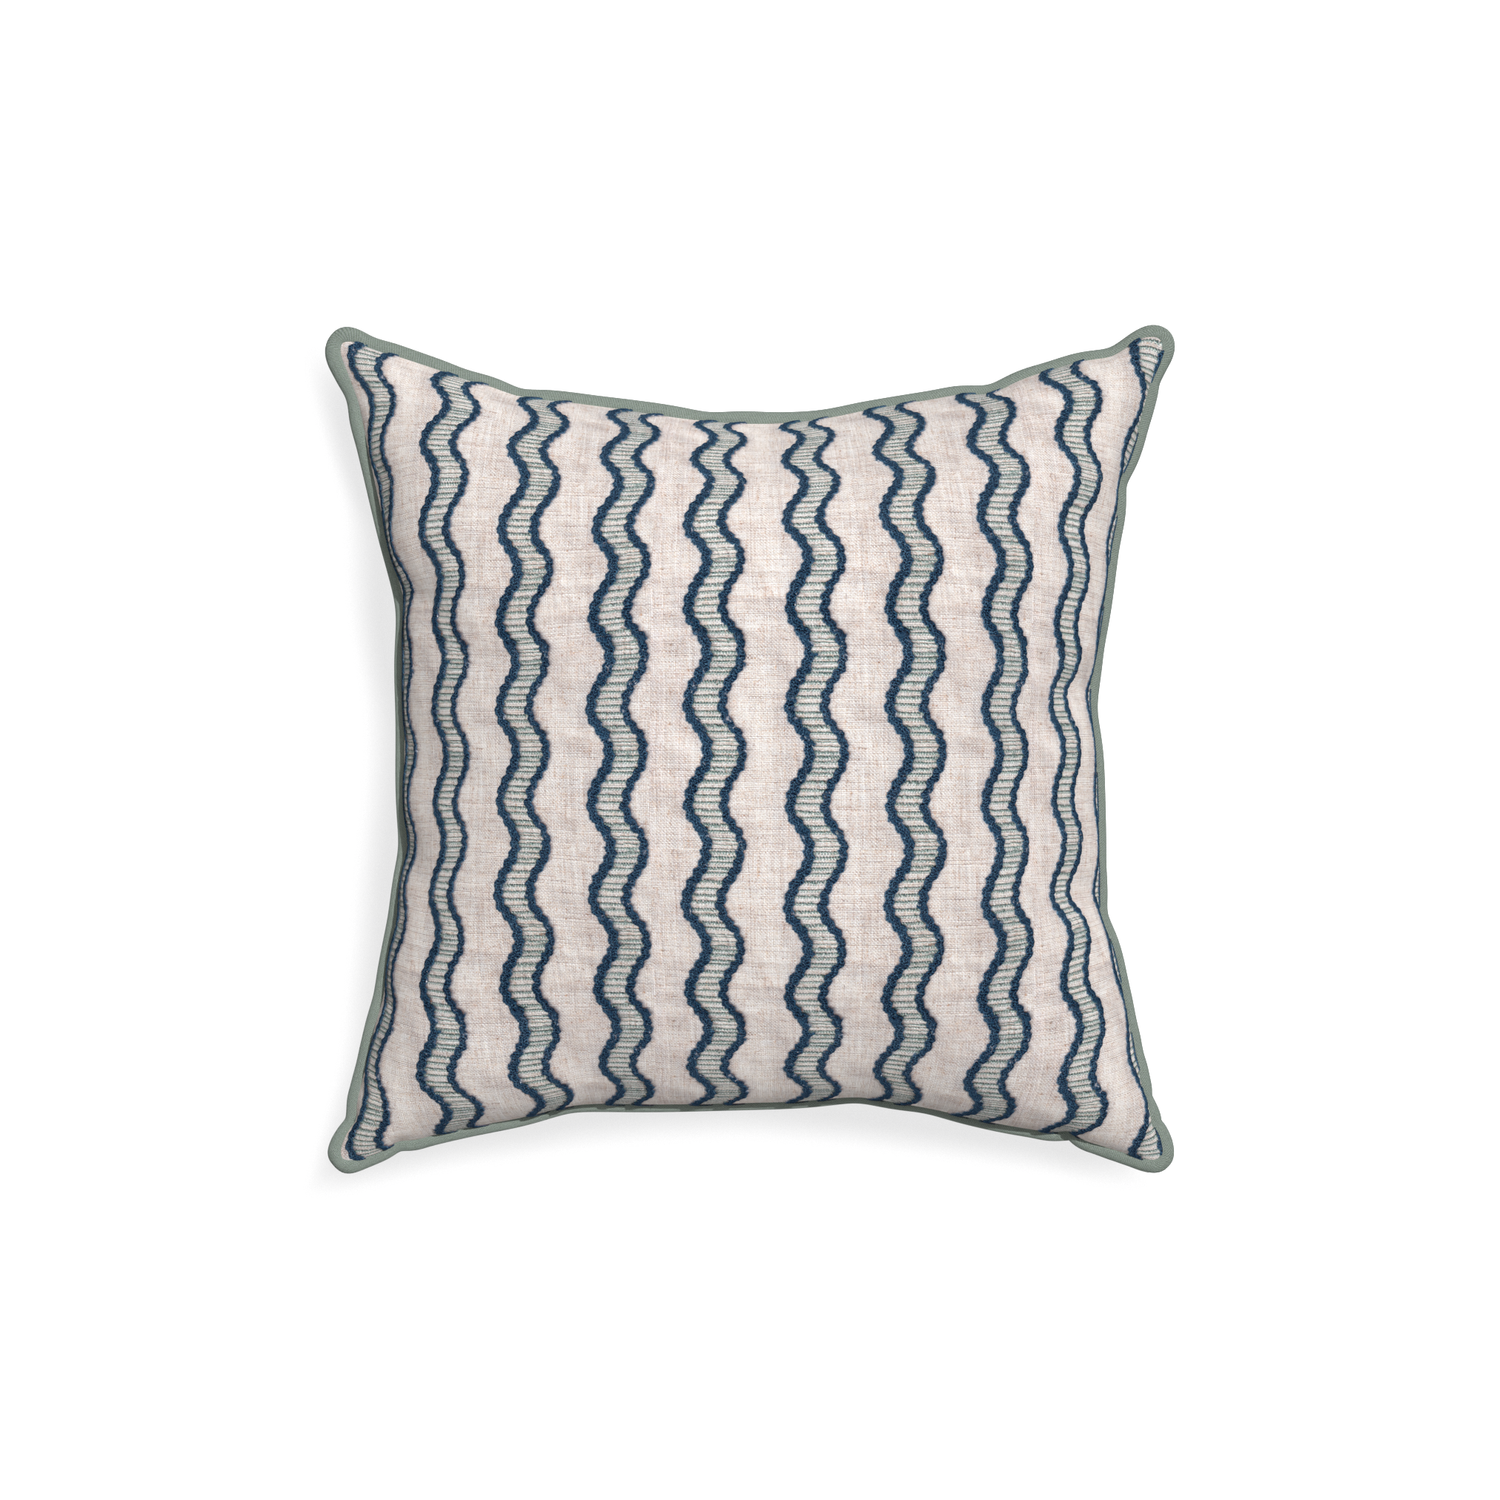 18-square beatrice custom embroidered wavepillow with sage piping on white background